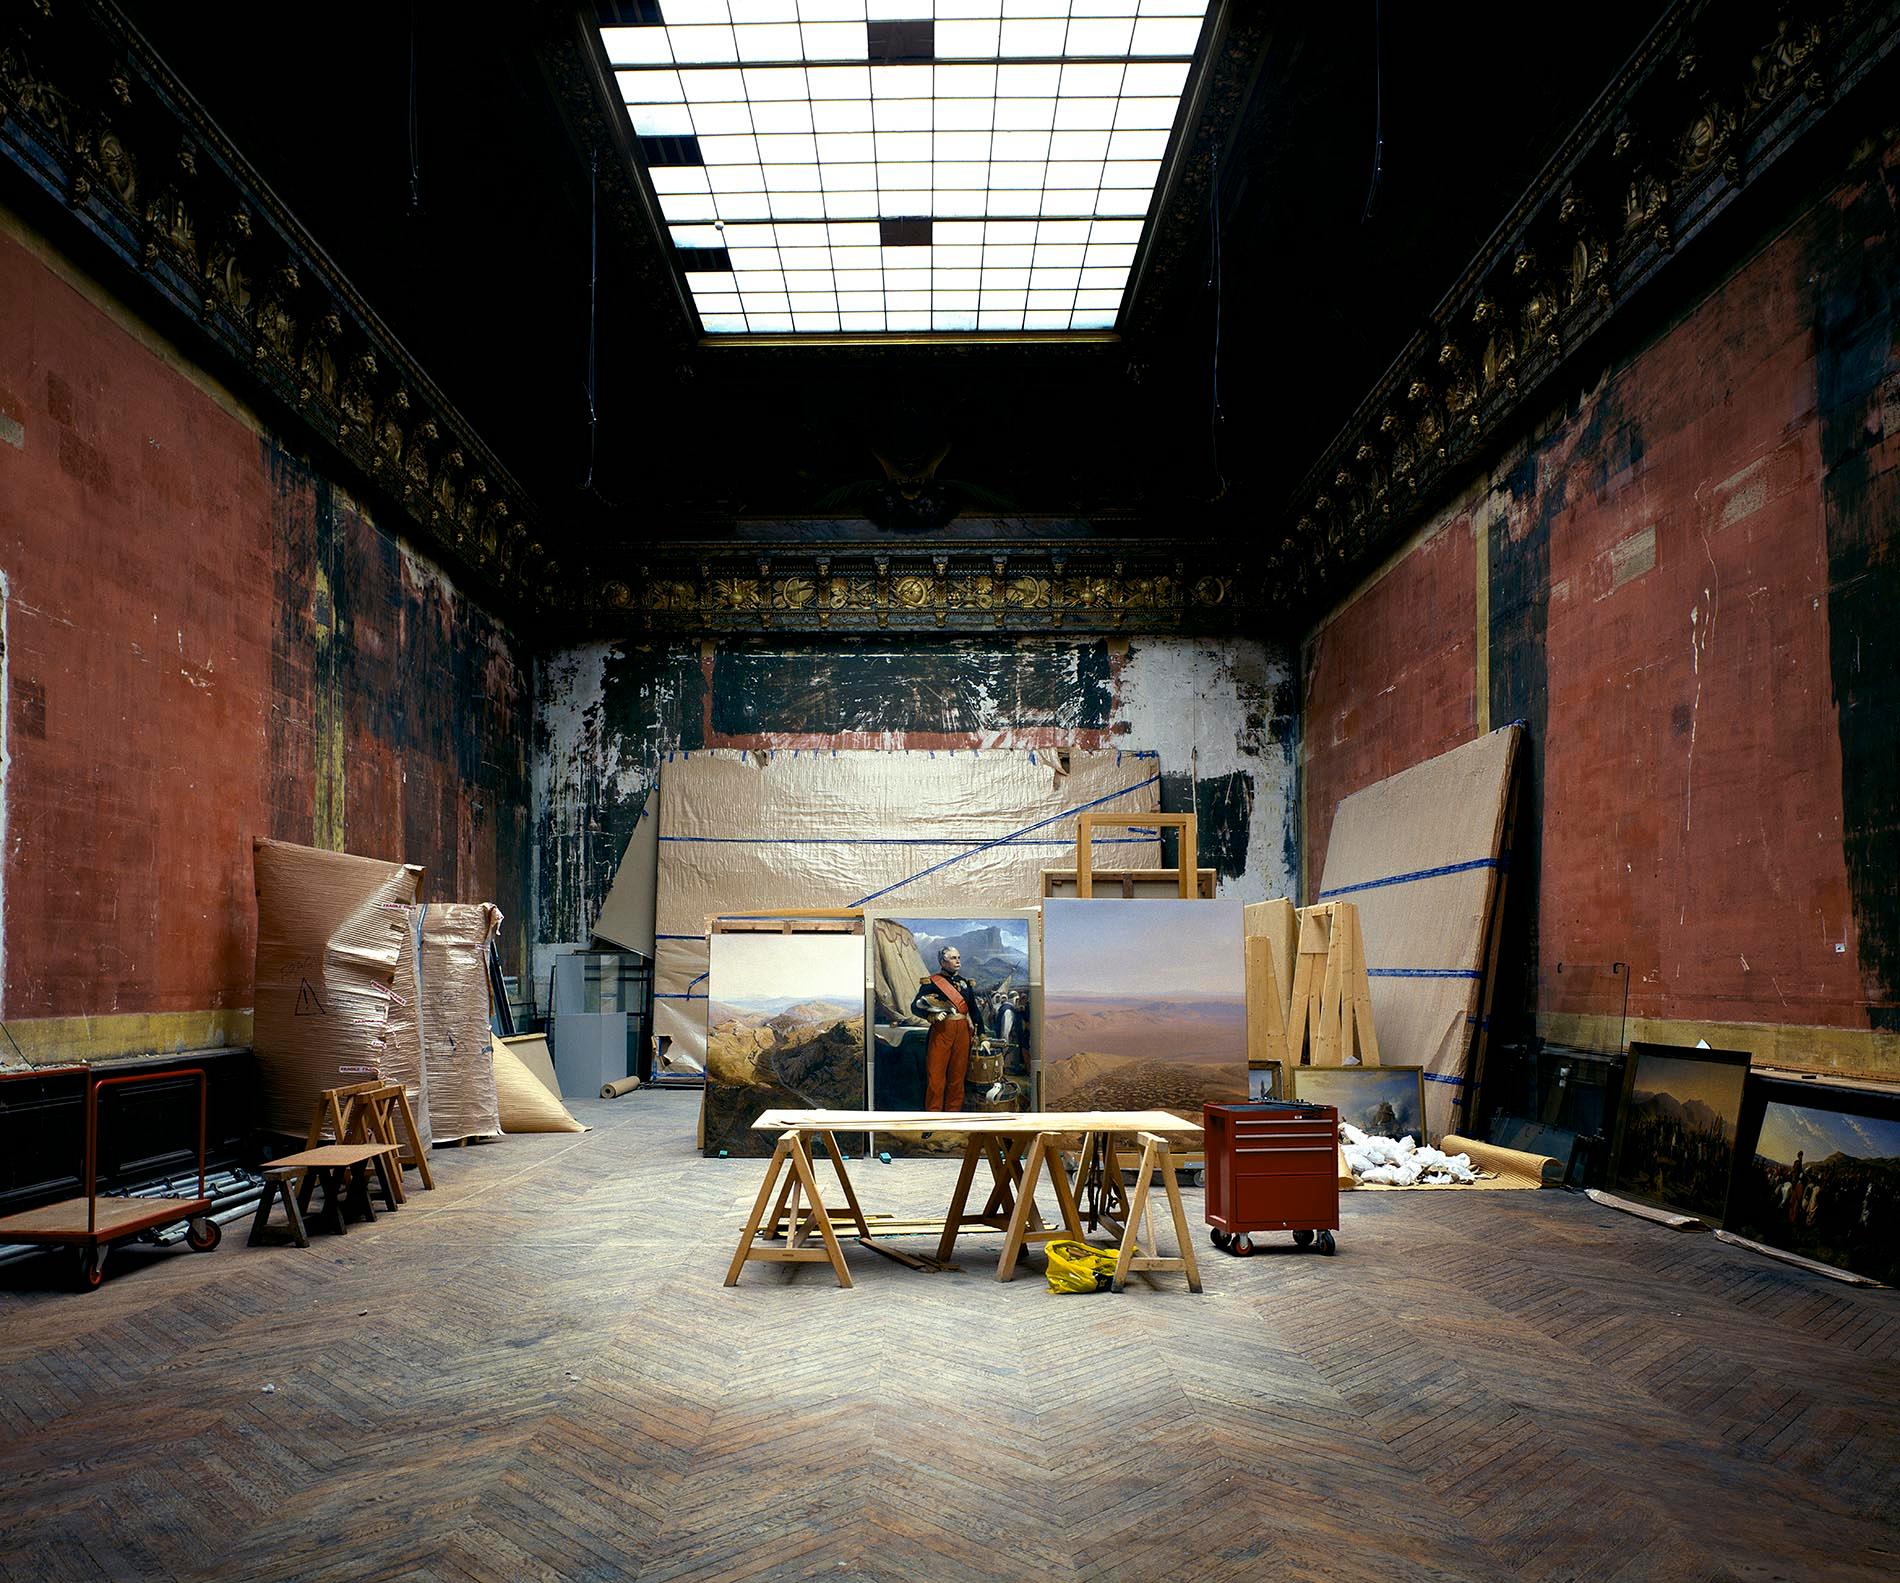 Massimo Listri Color Photograph - Versailles II, Francia 2003 - inside the palace with paintings, red walls